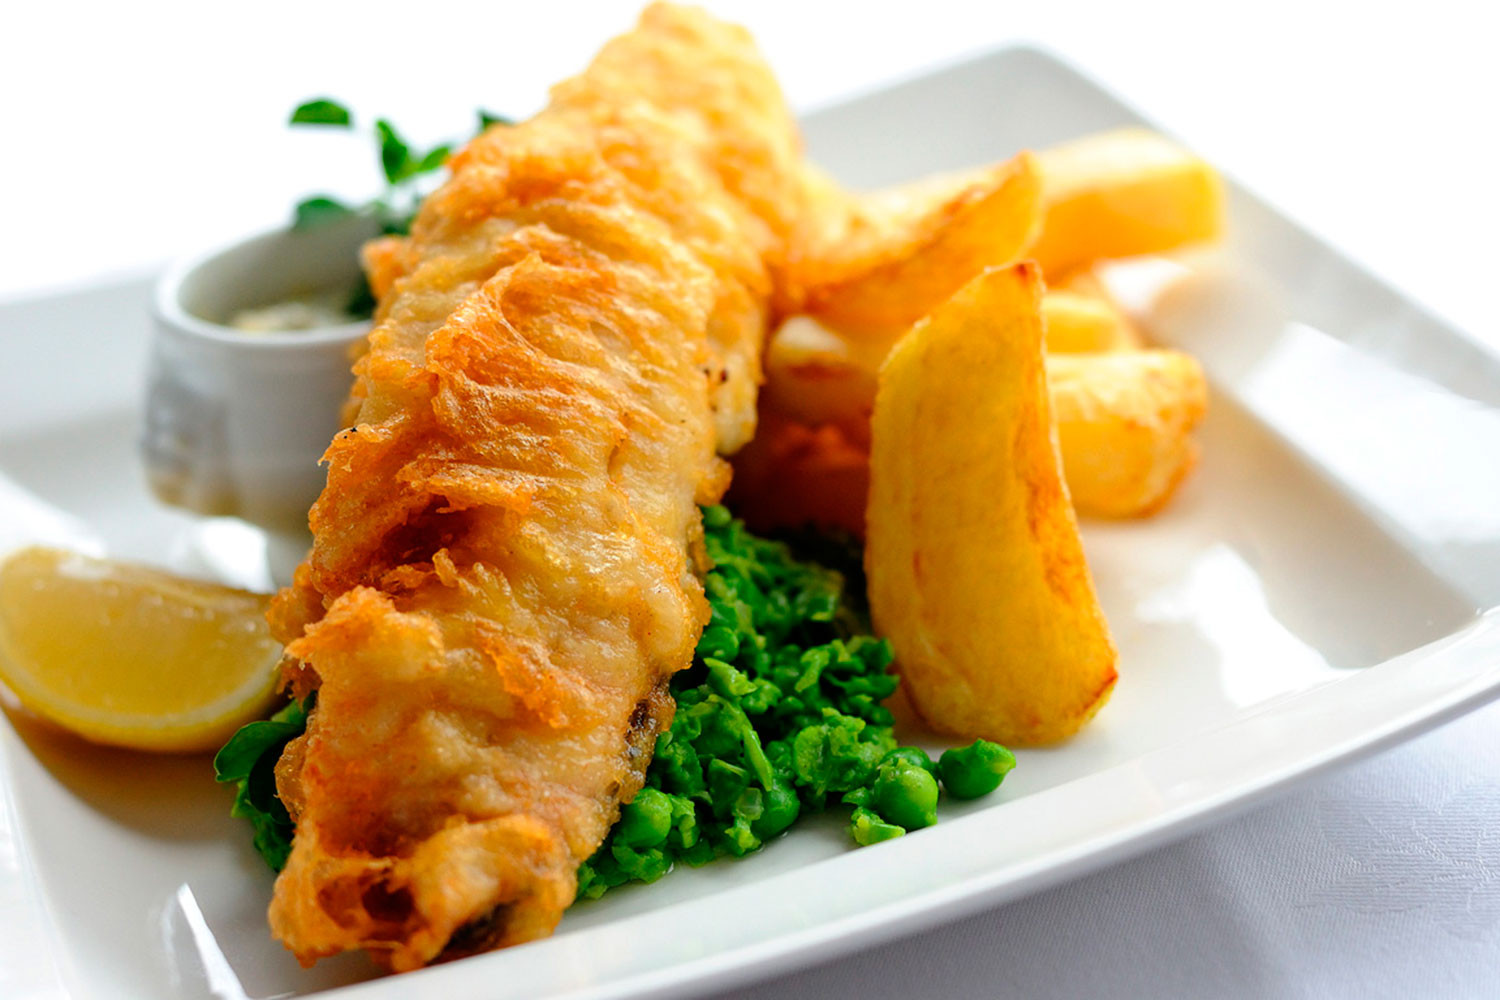 Recipes For Fish And Chips
 Quick and easy British seafood and fish and chip recipes